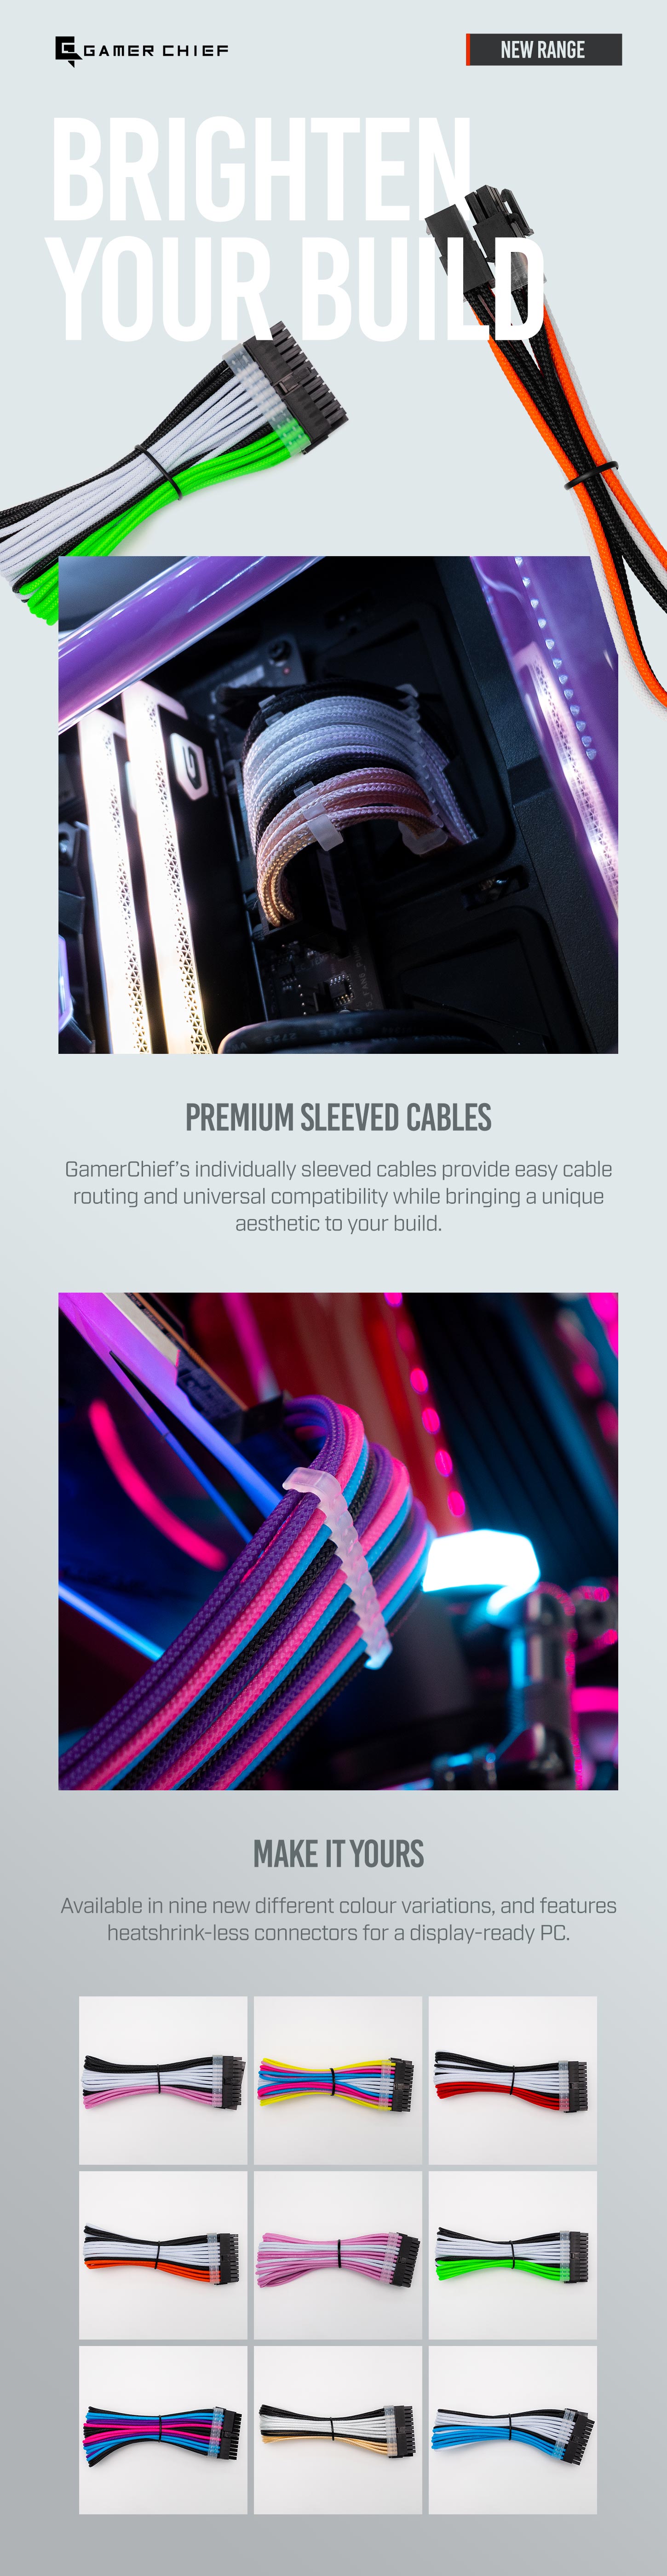 A large marketing image providing additional information about the product GamerChief Elite Series 8-Pin EPS 30cm Sleeved Extension Cable (Yellow / Light Pink / Pink / Blue / White) - Additional alt info not provided